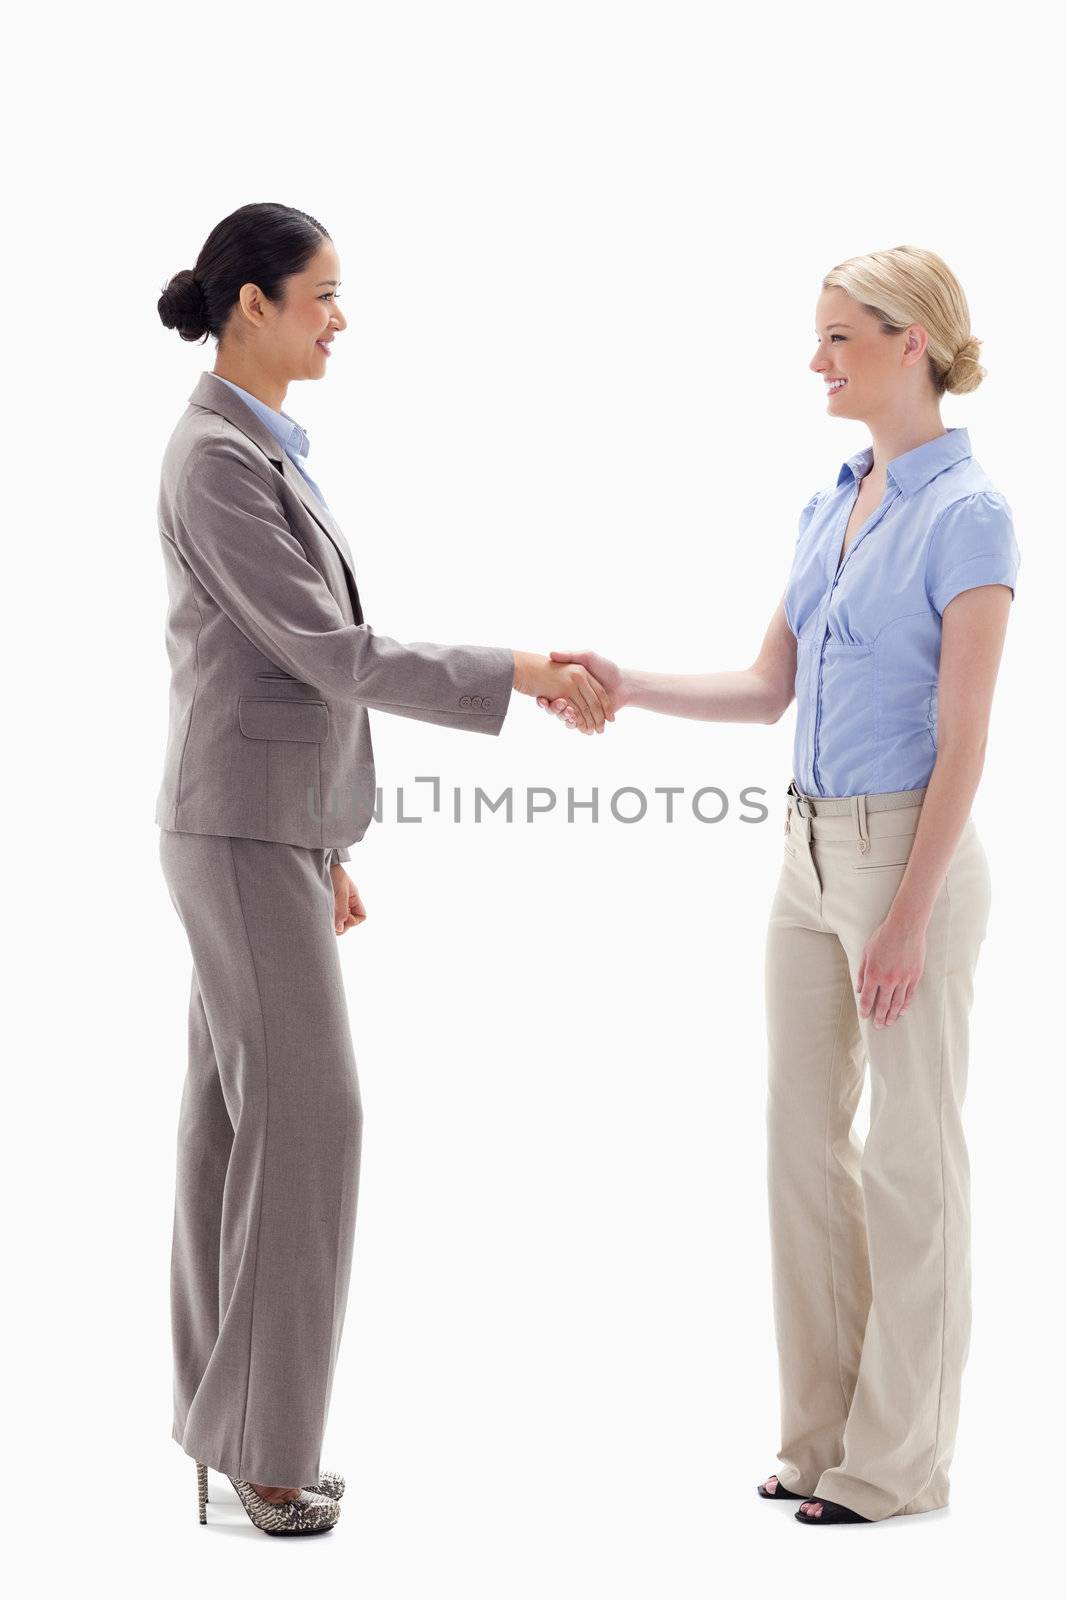 Women shaking hands happily against white background